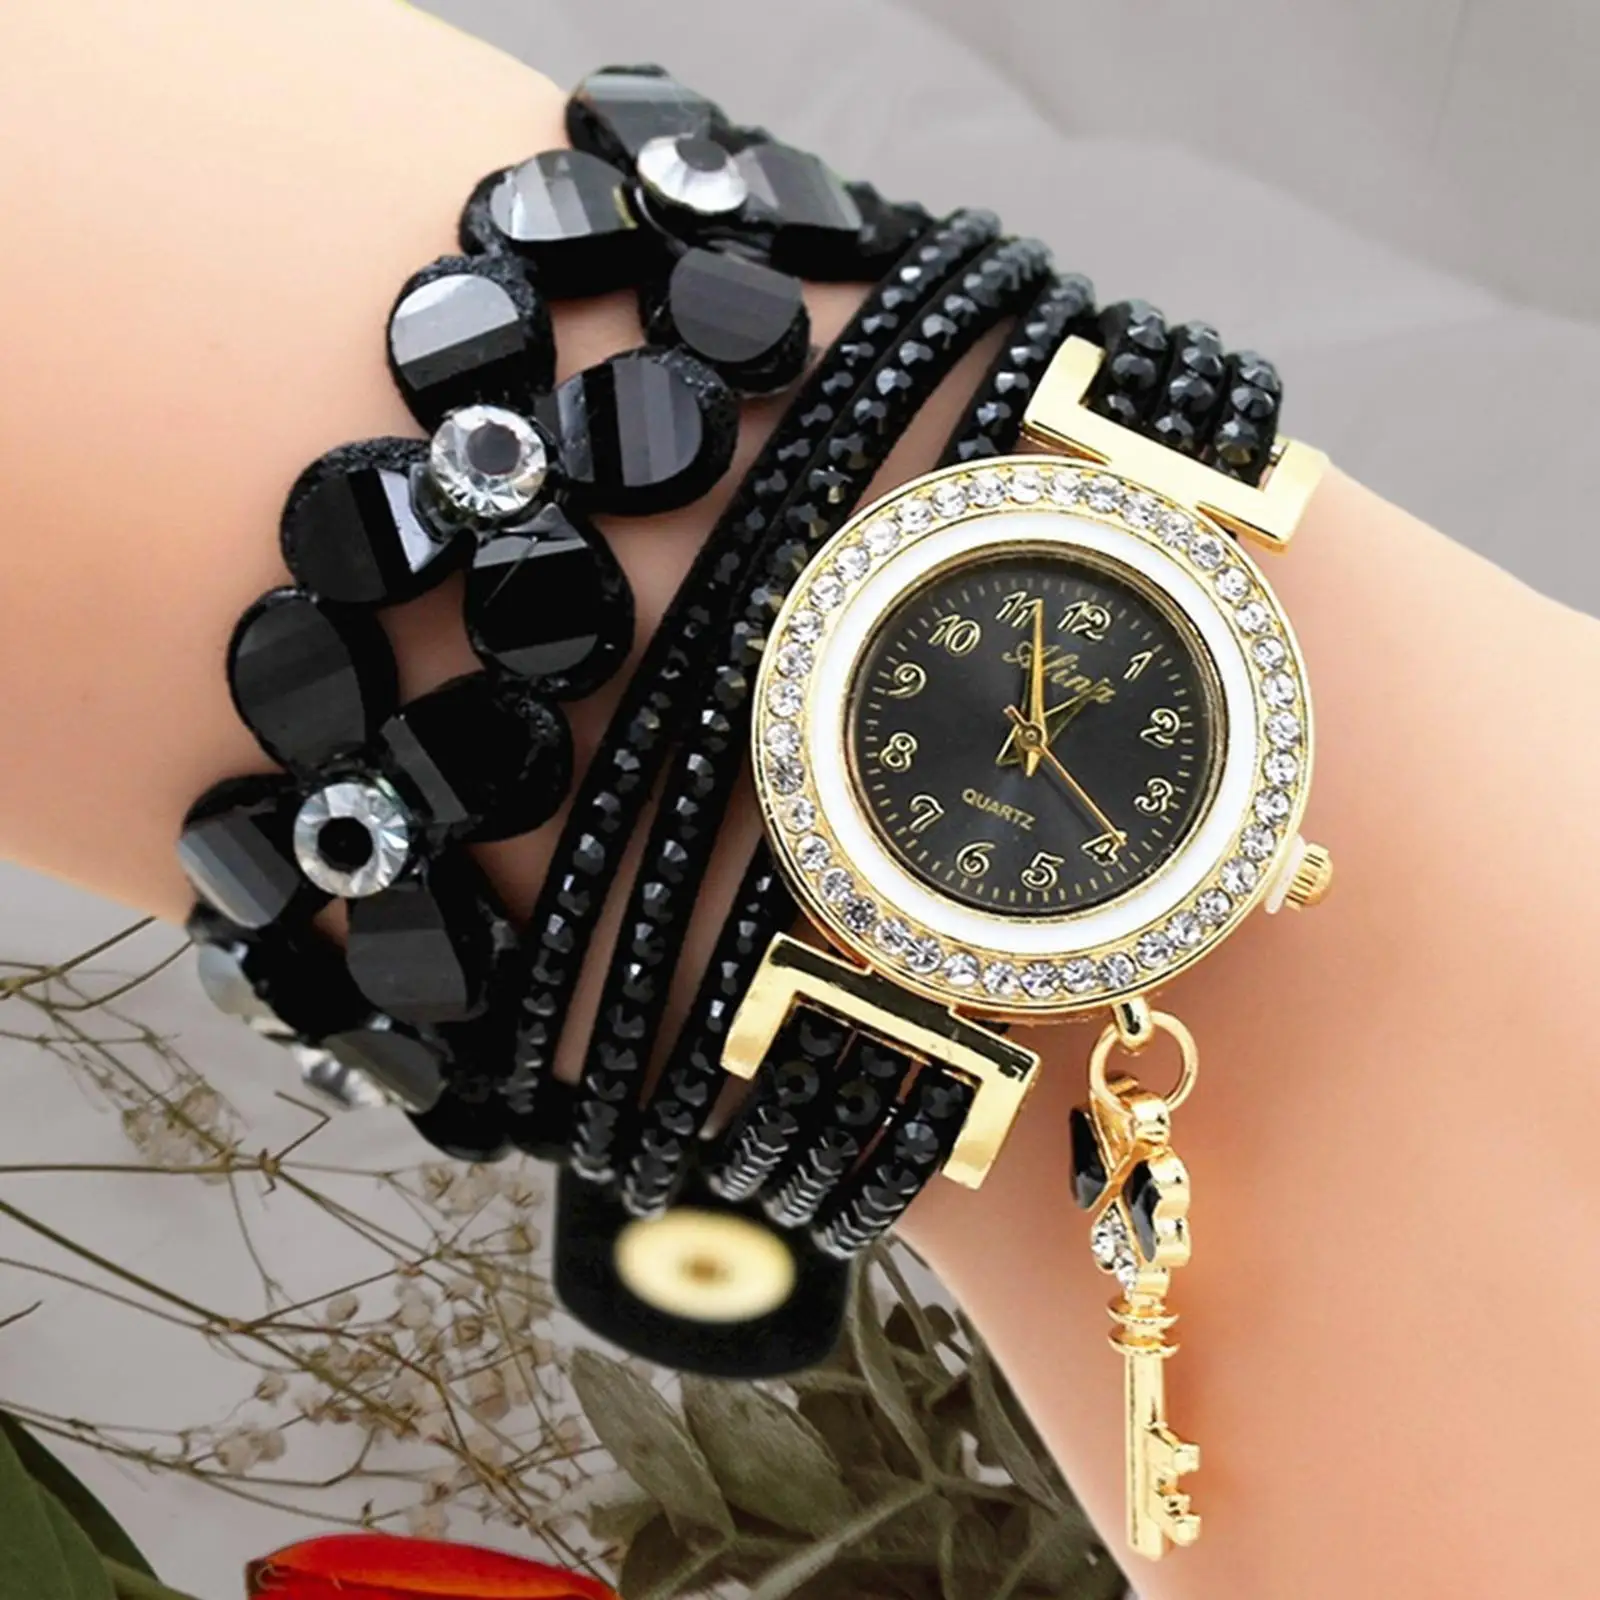 Bracelet Watch Portable Time Display Fashion Pointer Durable Women Watch for Camping Travel Fishing Backpacking Birthday Gift